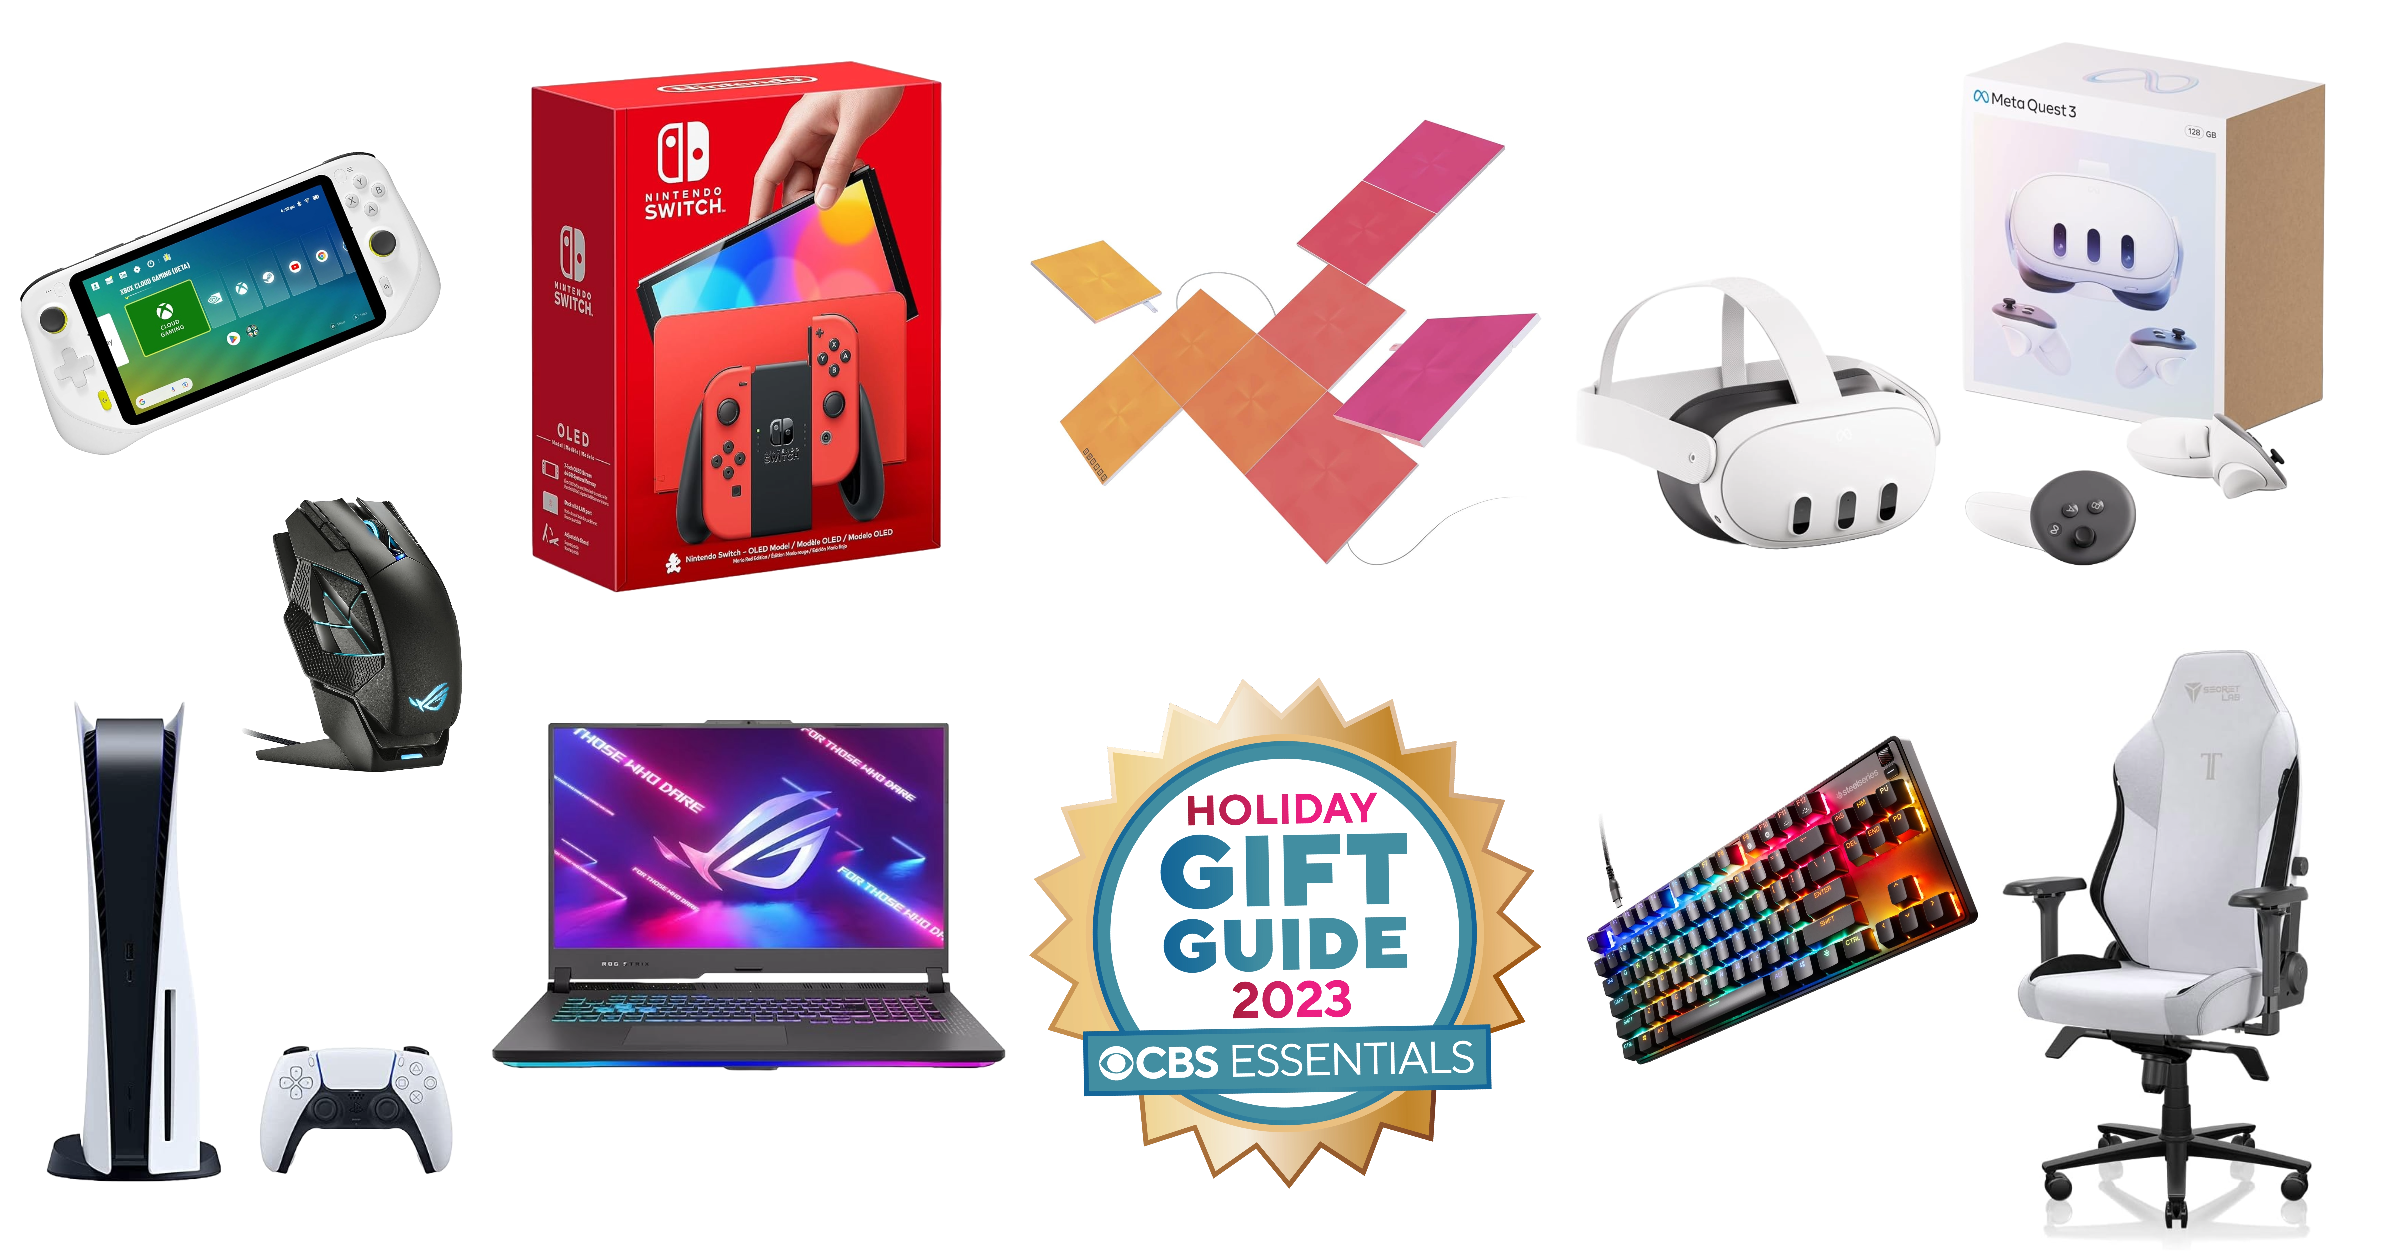 The Best Christmas Gifts For Competitive Gamers 2019 - GameSpot